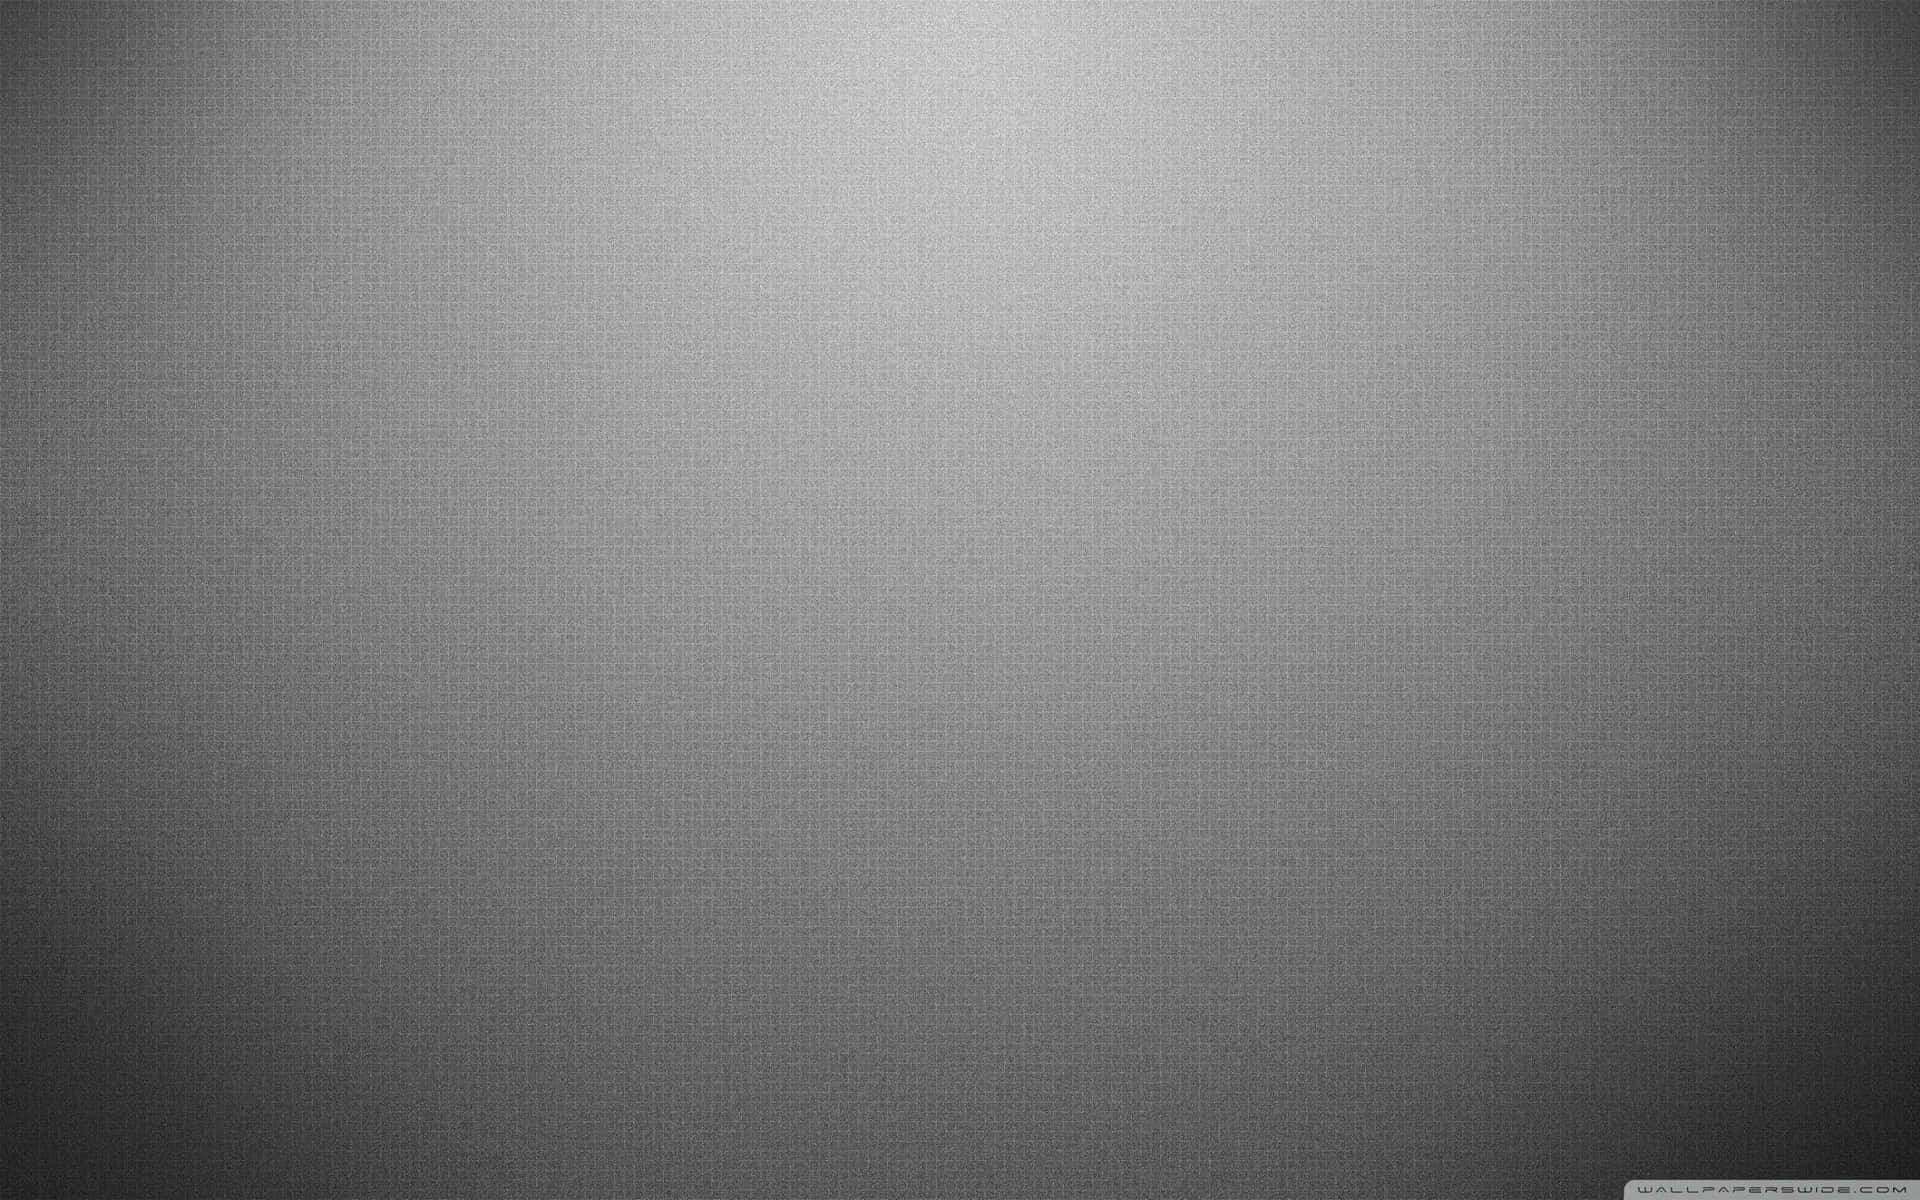 Subtle grey texture in an abstract pattern on random background